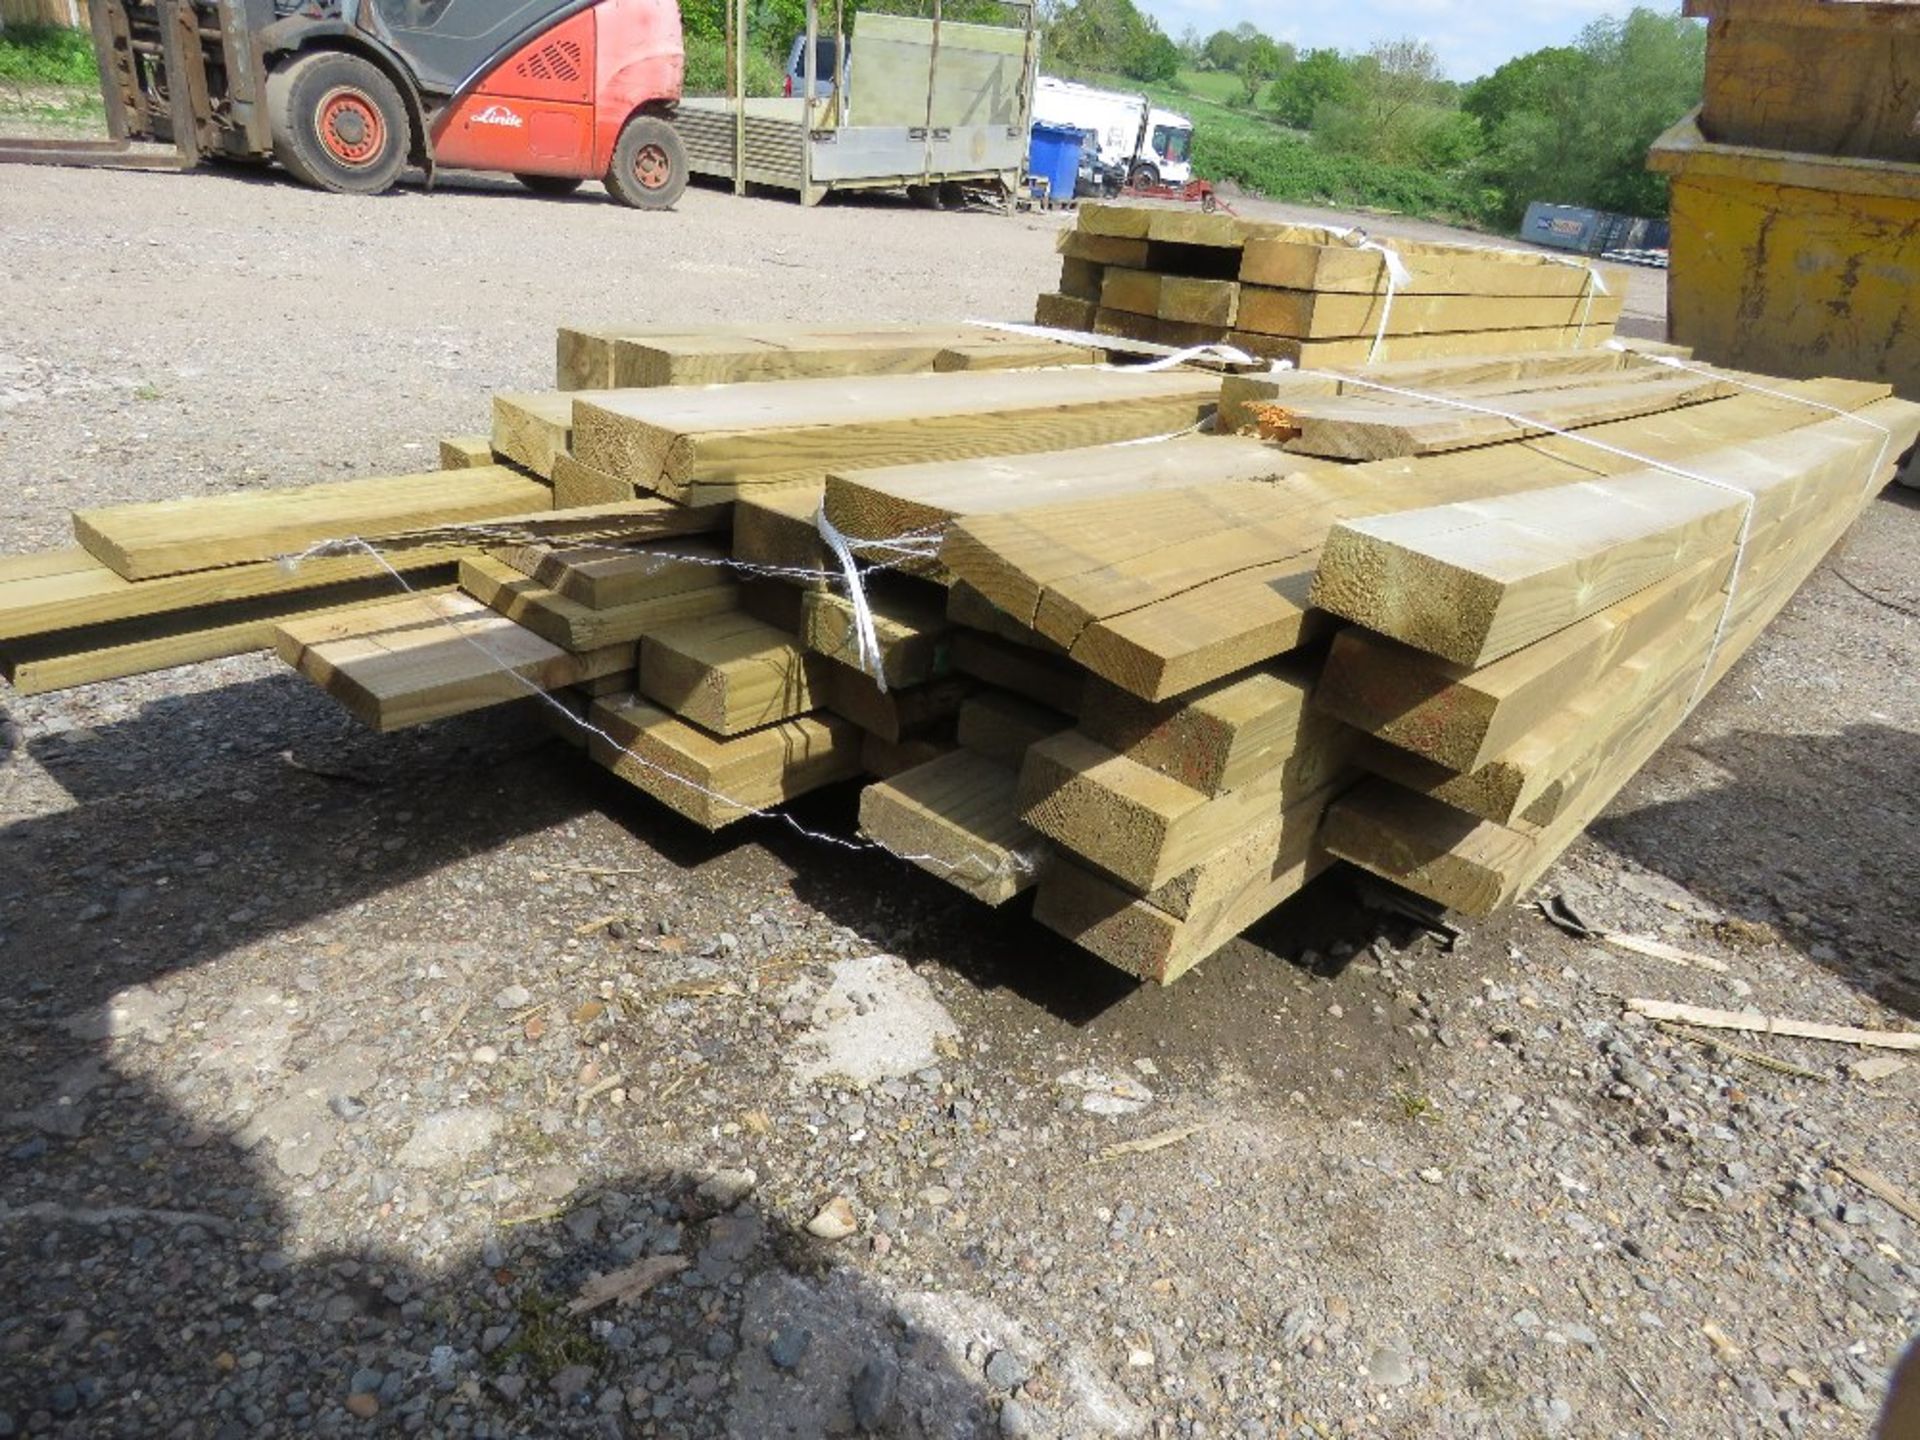 2 X BUNDLES OF TREATED FENCING TIMBERS, POSTS AND BOARDS AS SHOWN, 5-12FT LENGTH APPROX. - Image 3 of 4